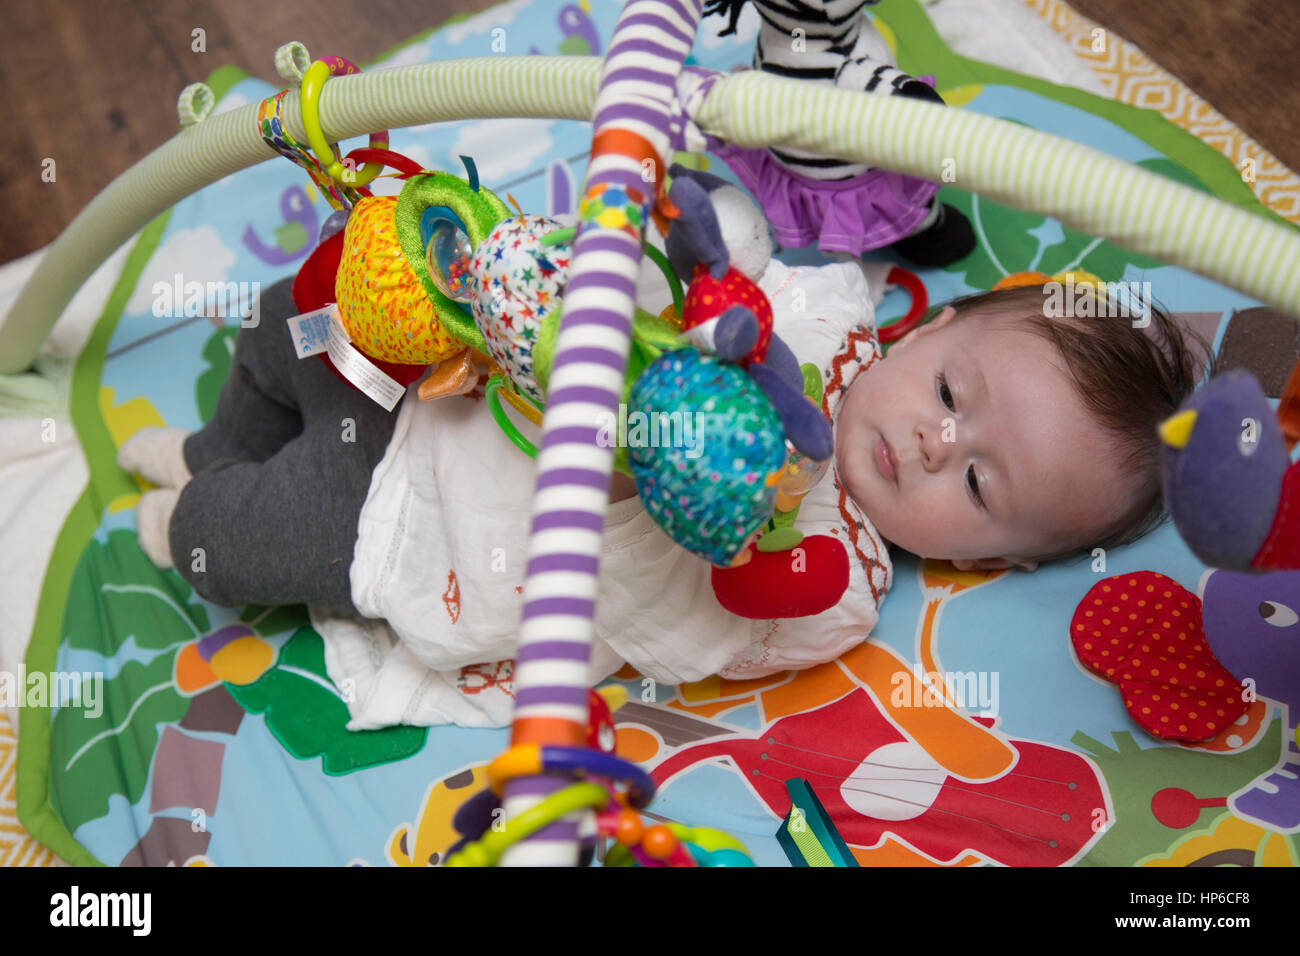 Baby playing on play mat Stock Photo